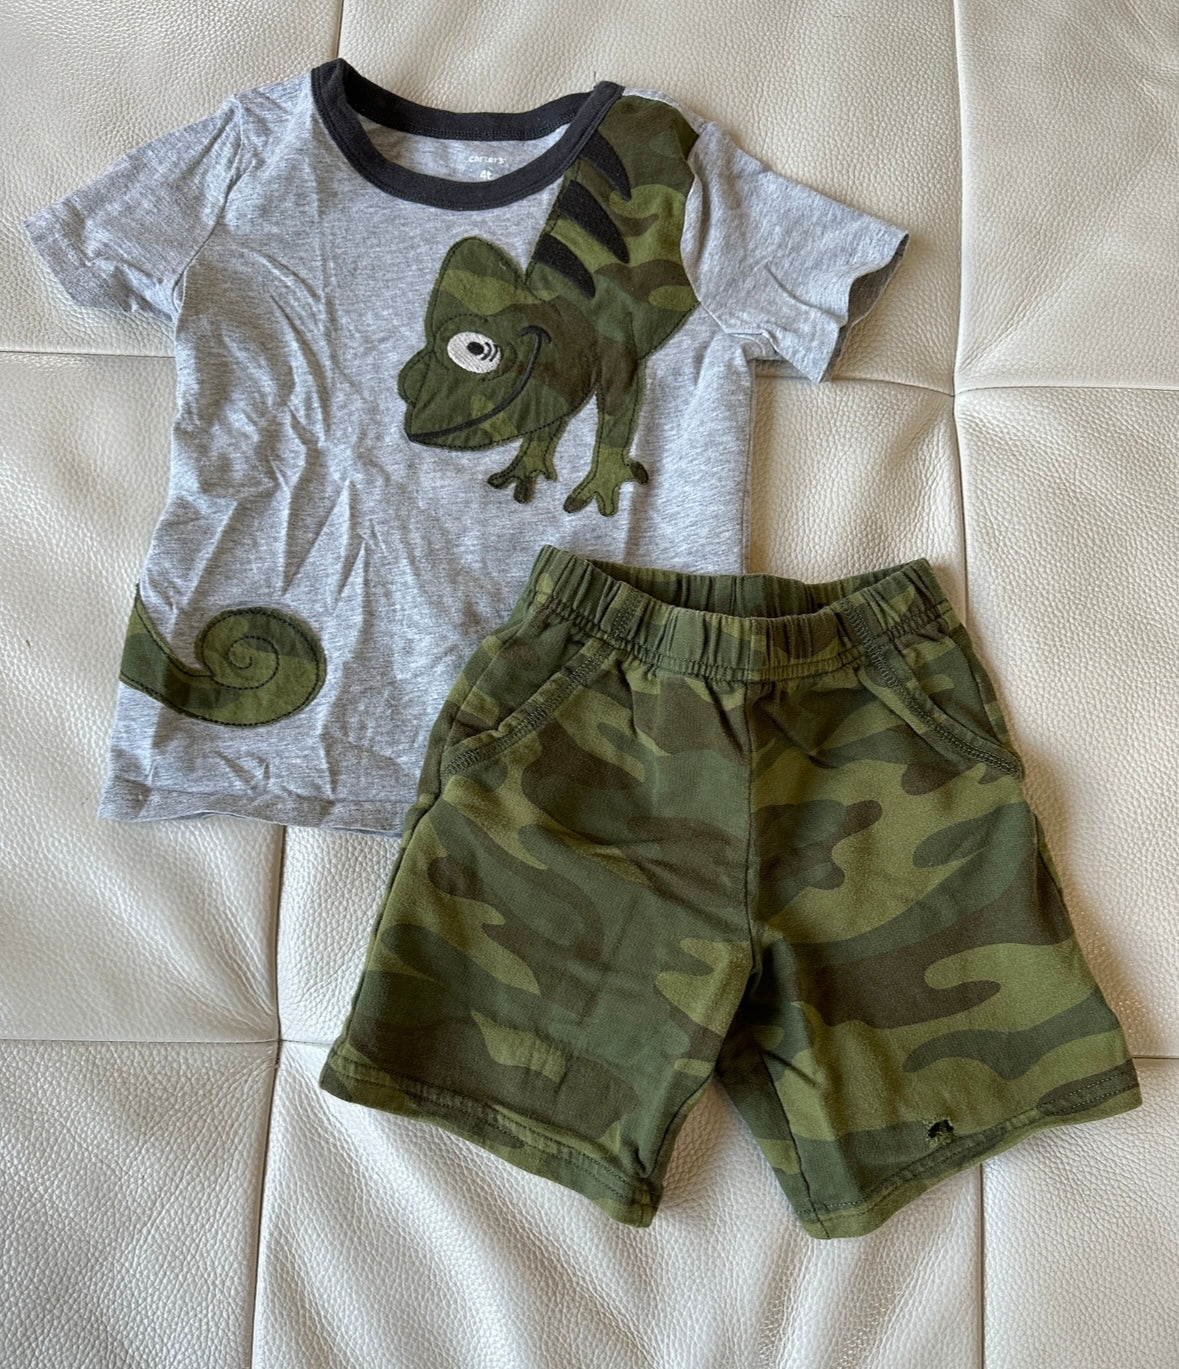 Carter’s size 4t lizard outfit